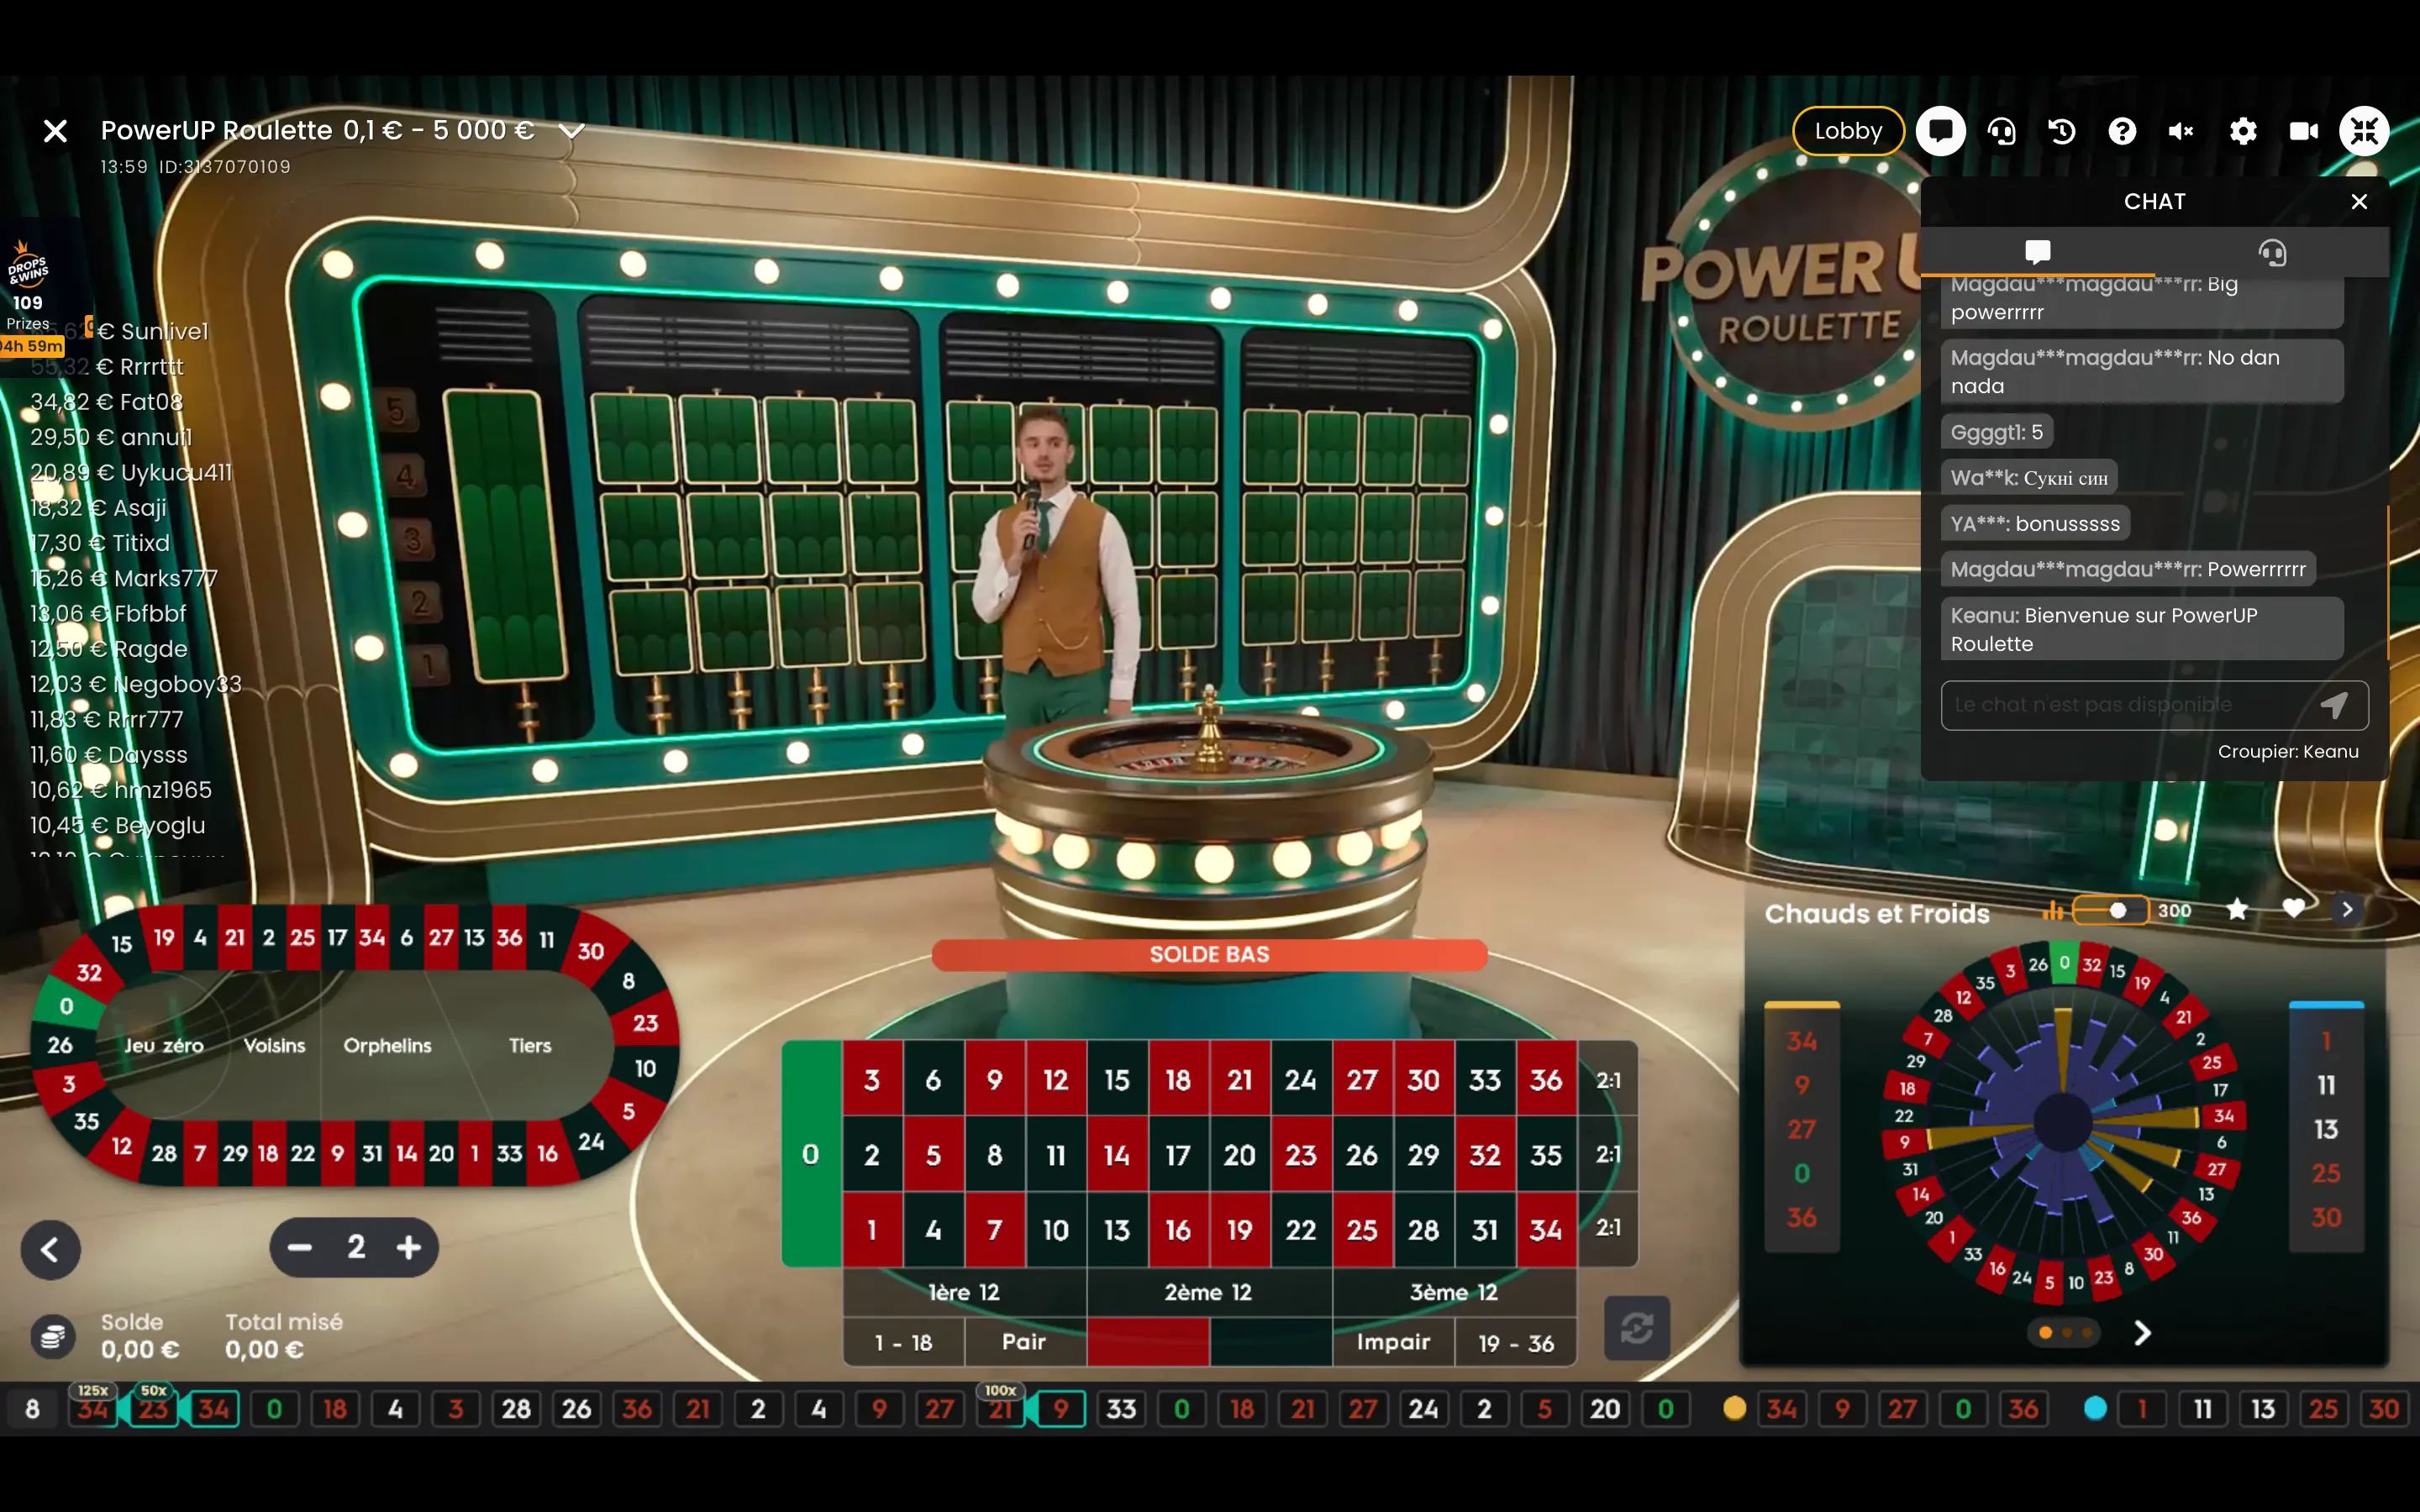 PowerUp Roulette